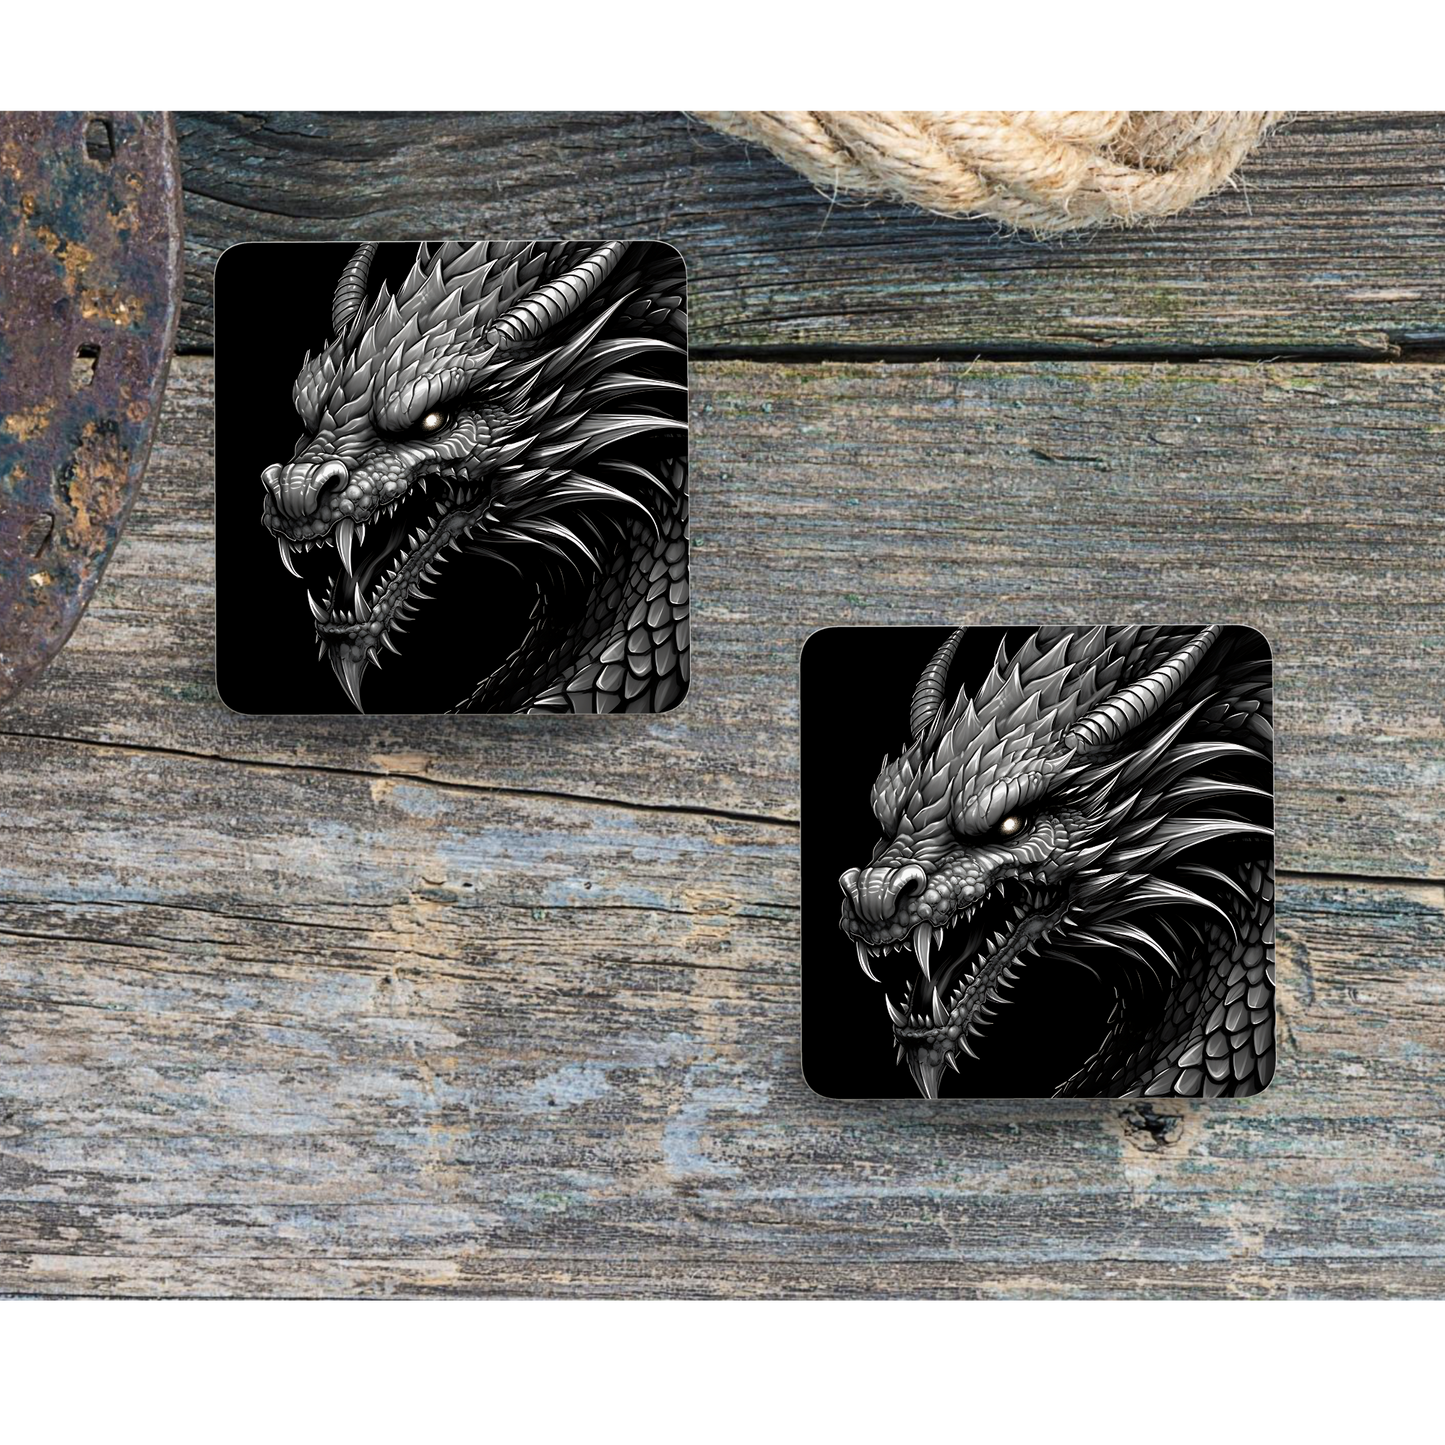 Beautifully Printed  Fantasy Dragon Wooden Coasters for Stylish Home Décor